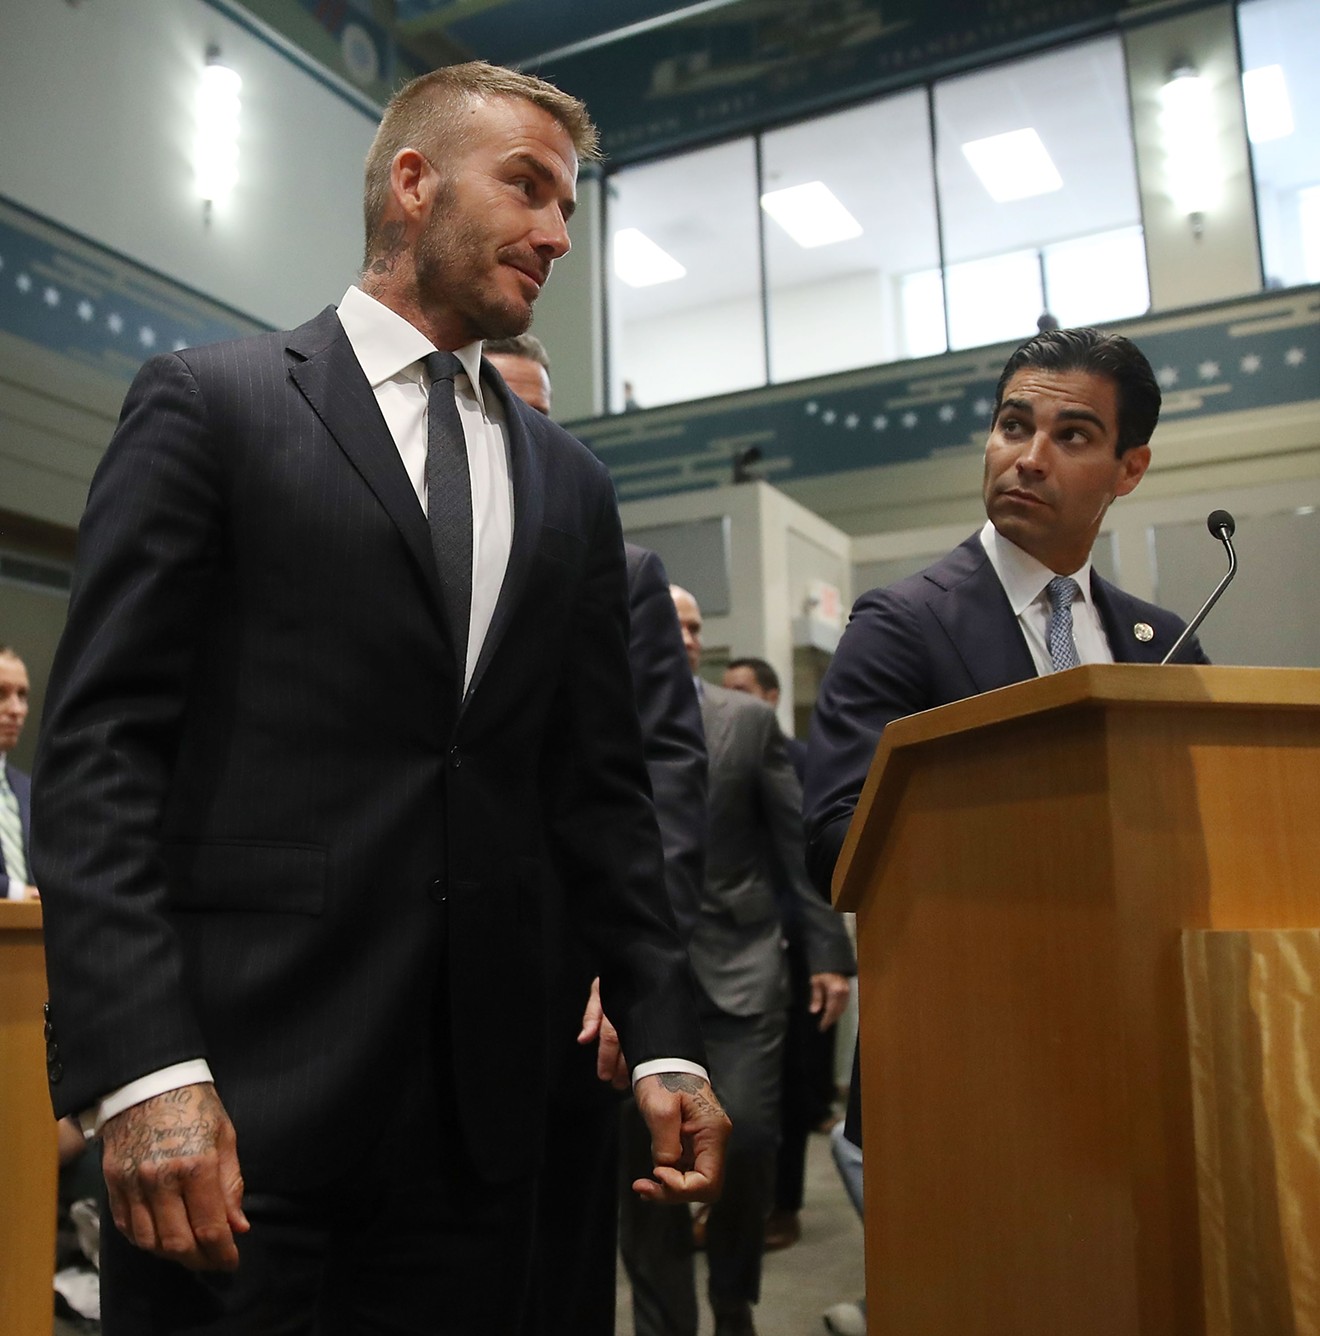 Miami Mayor Francis Suarez looks on as David Beckham arrives for a meeting at Miami city hall in July 2018.